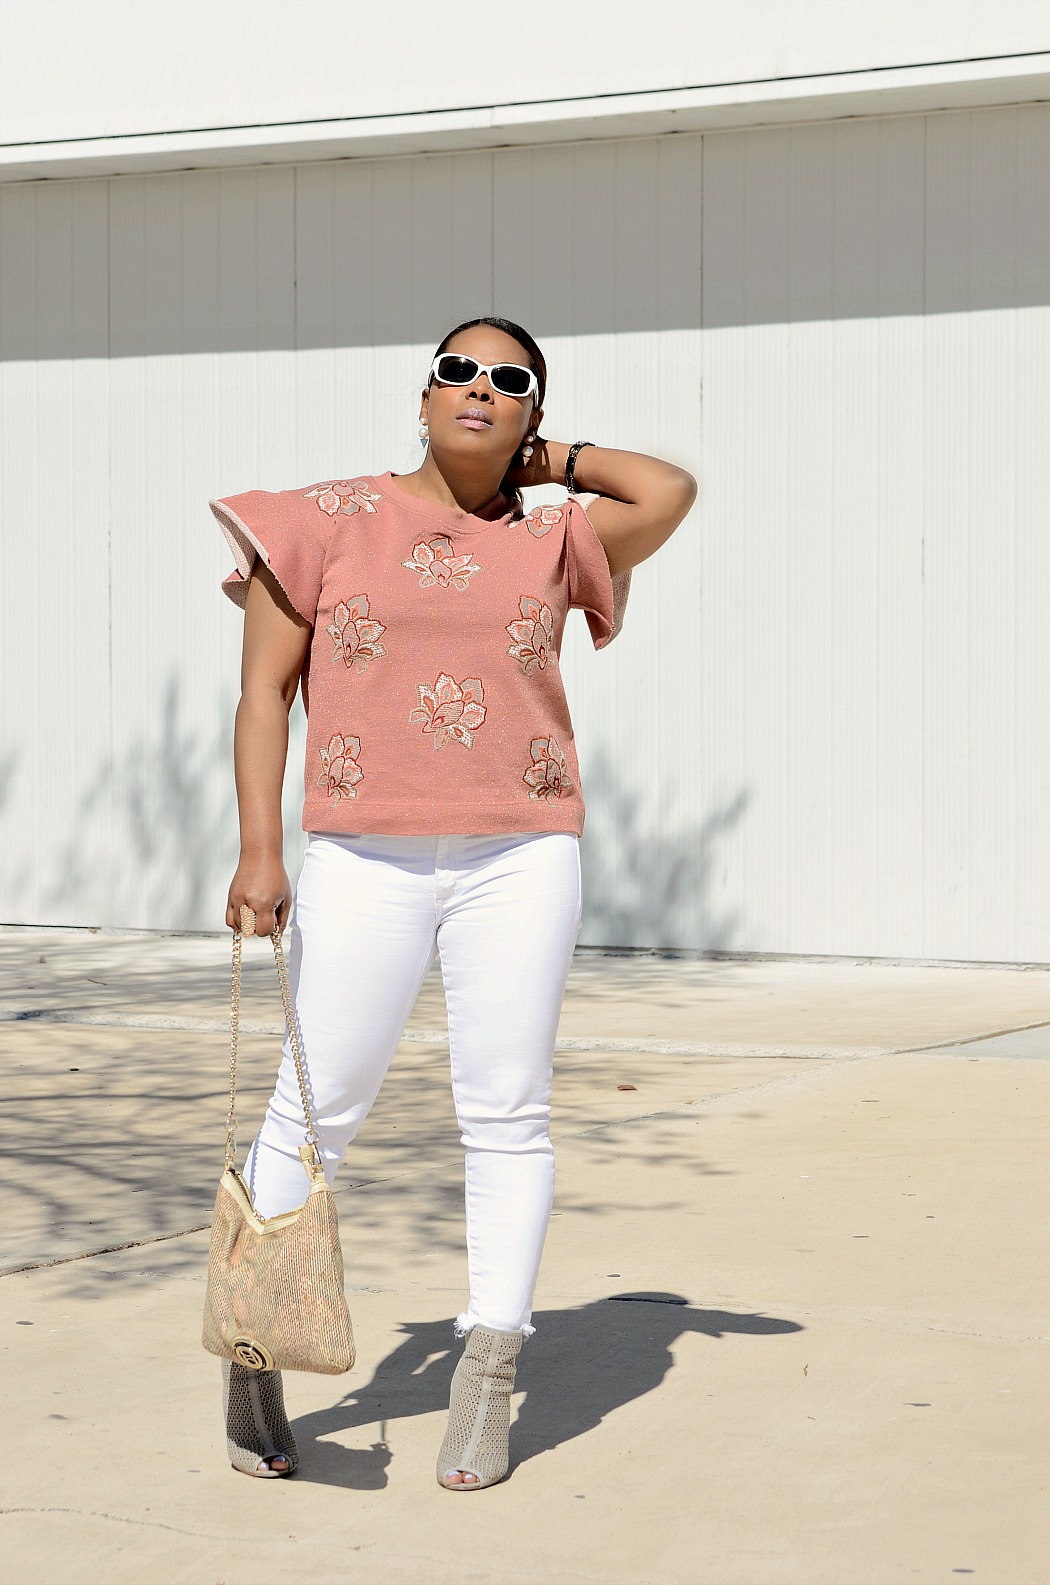 American Eagle High rise frayed skinny white jeans_Anthropologie flutter sleeve embroidered pink top_Chinese Laundry Perforated Ankkle Booties_Aldo Snakeskin Foldover Clutch